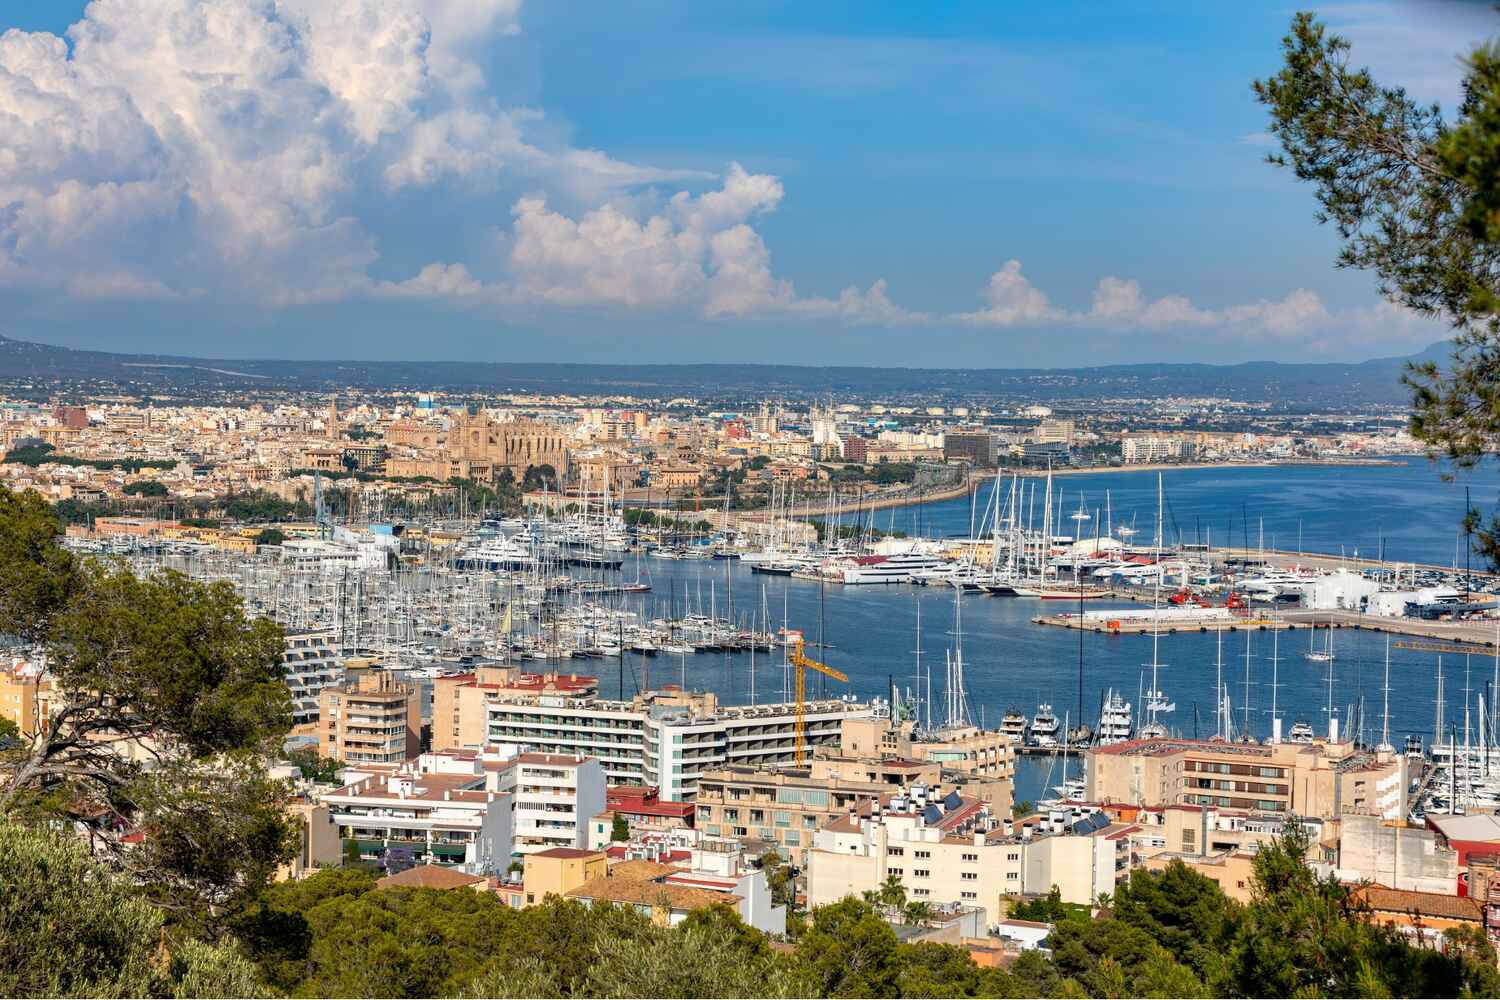 Aerial view of a coastal town in the Balearic islands, with a marina and extensive beaches.